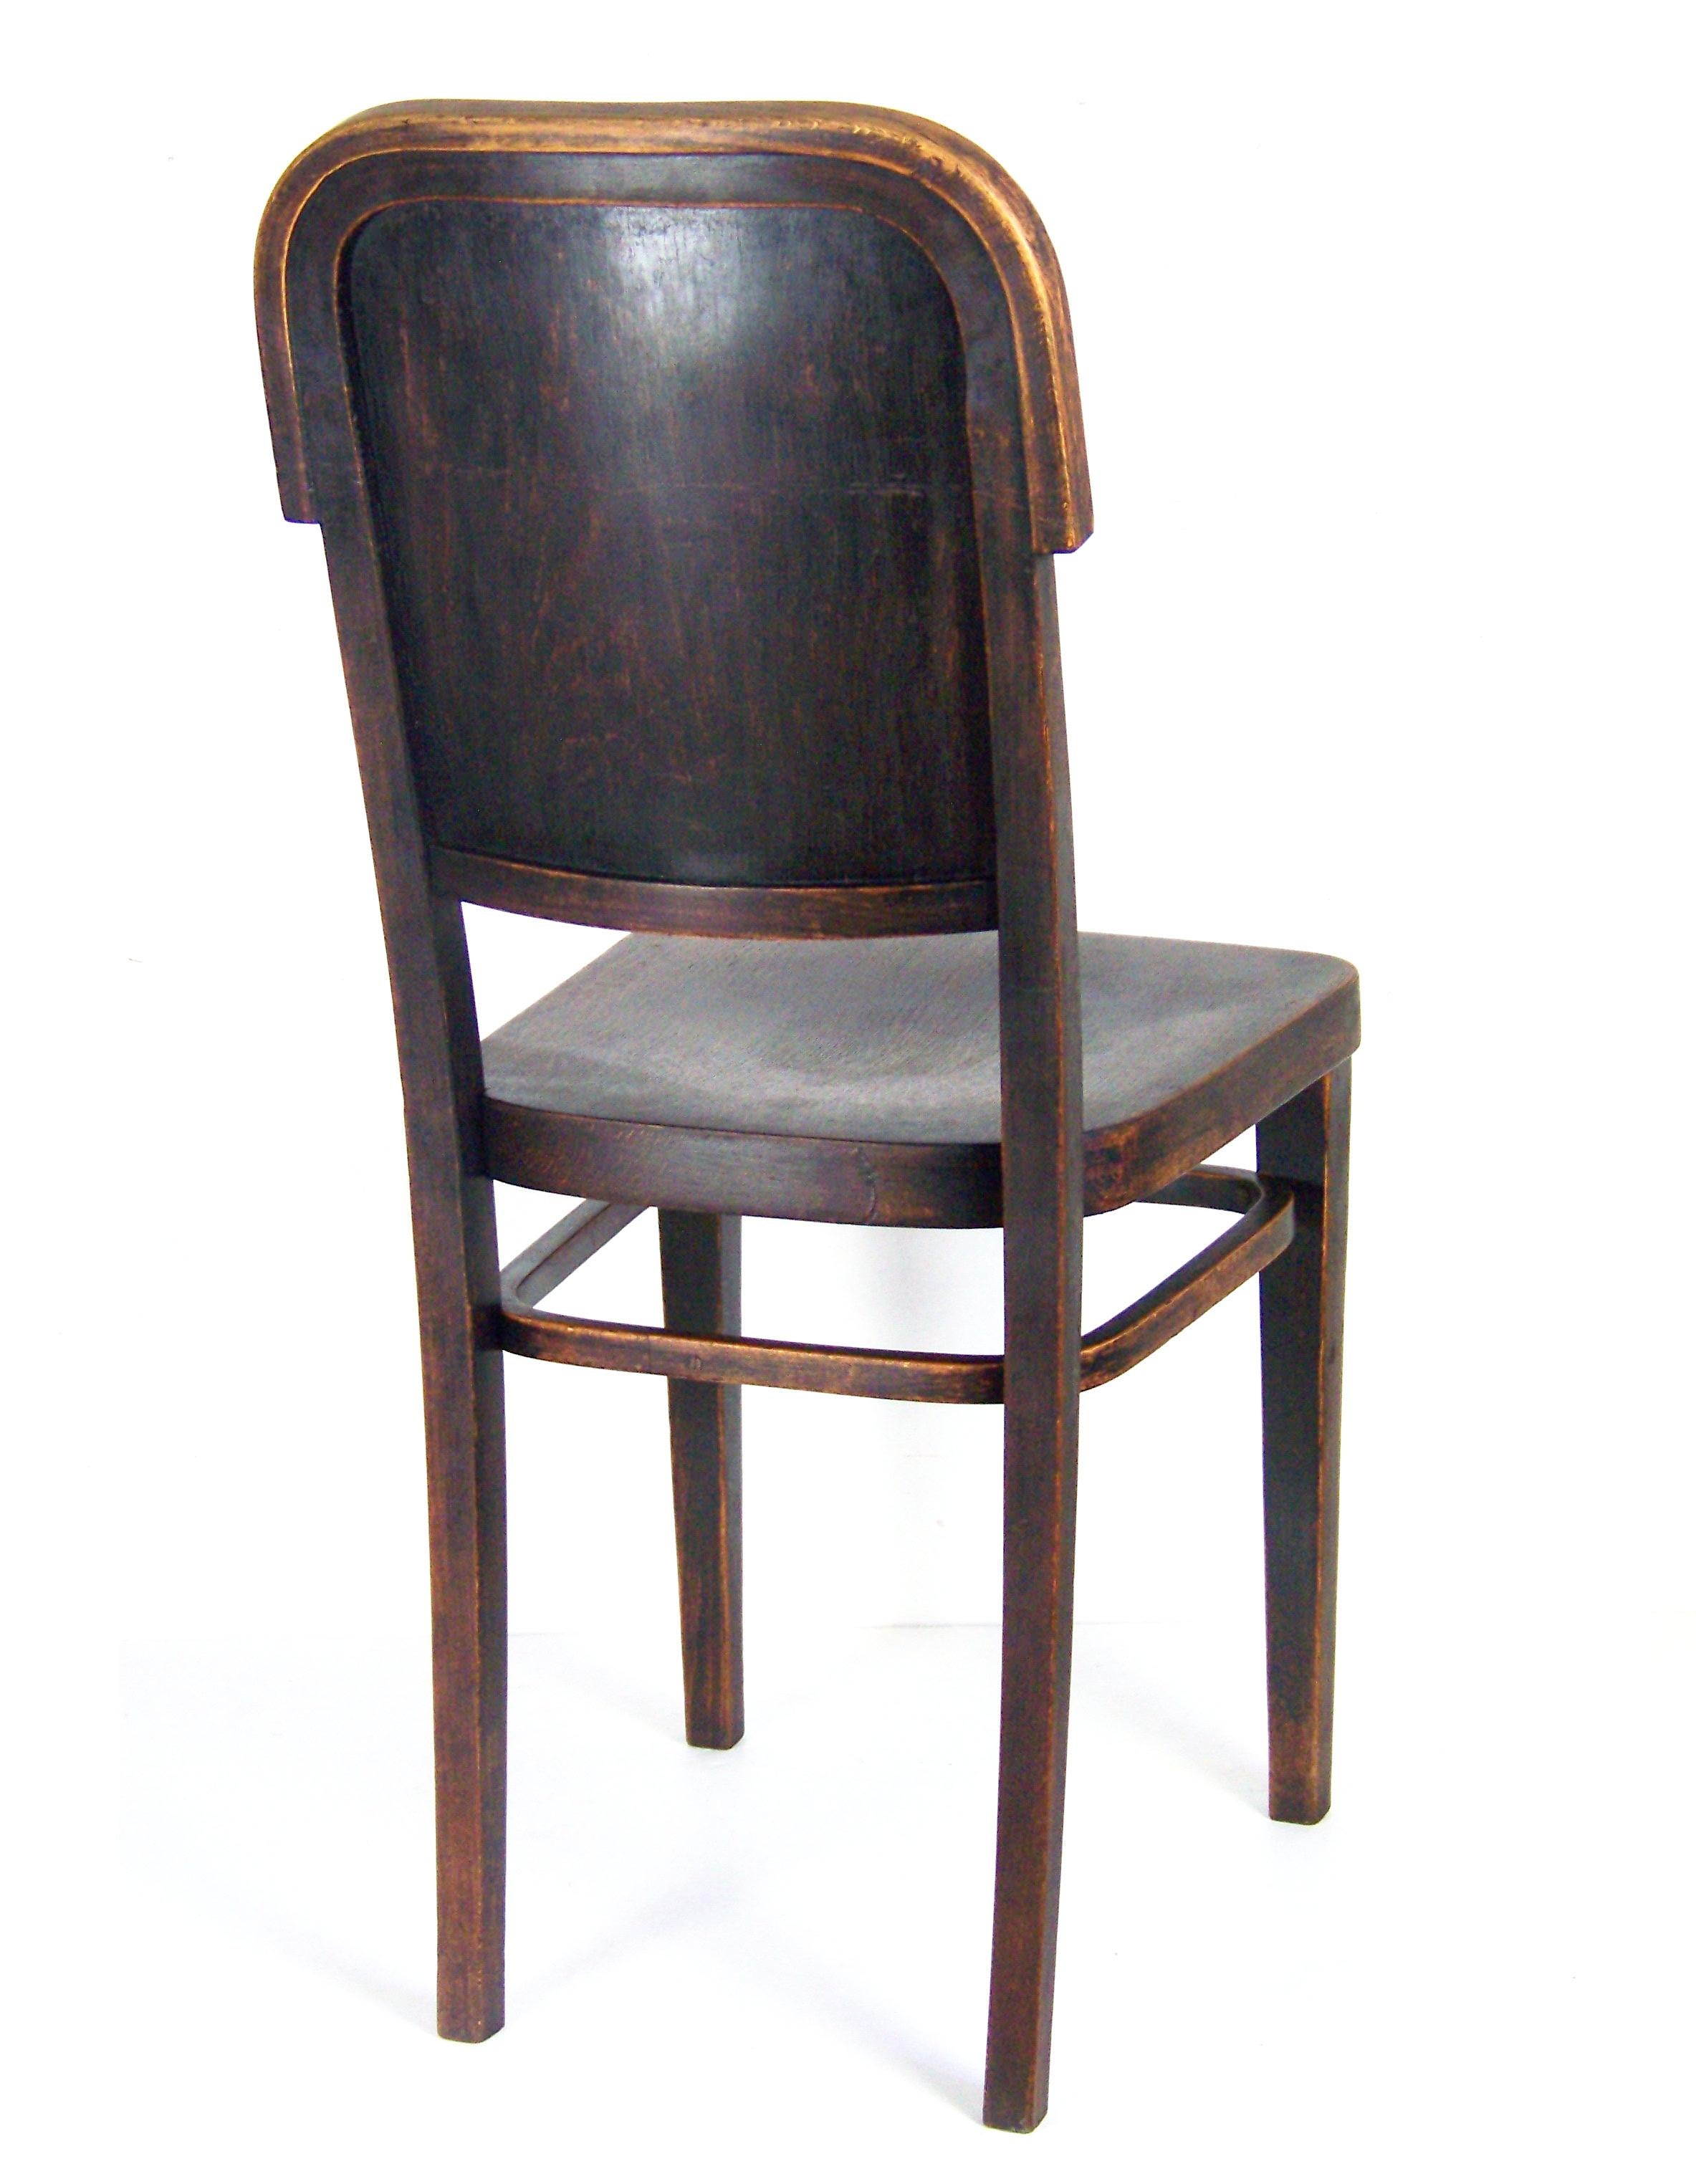 Designed by Jan Kotera in 1907 for National guild house in city Prostejov. Manufactured in Austria by the Gebrüder Thonet Company after year 1918. Original state with a pleasant patina of age, perfectly cleaned and re-polished with hard wax.